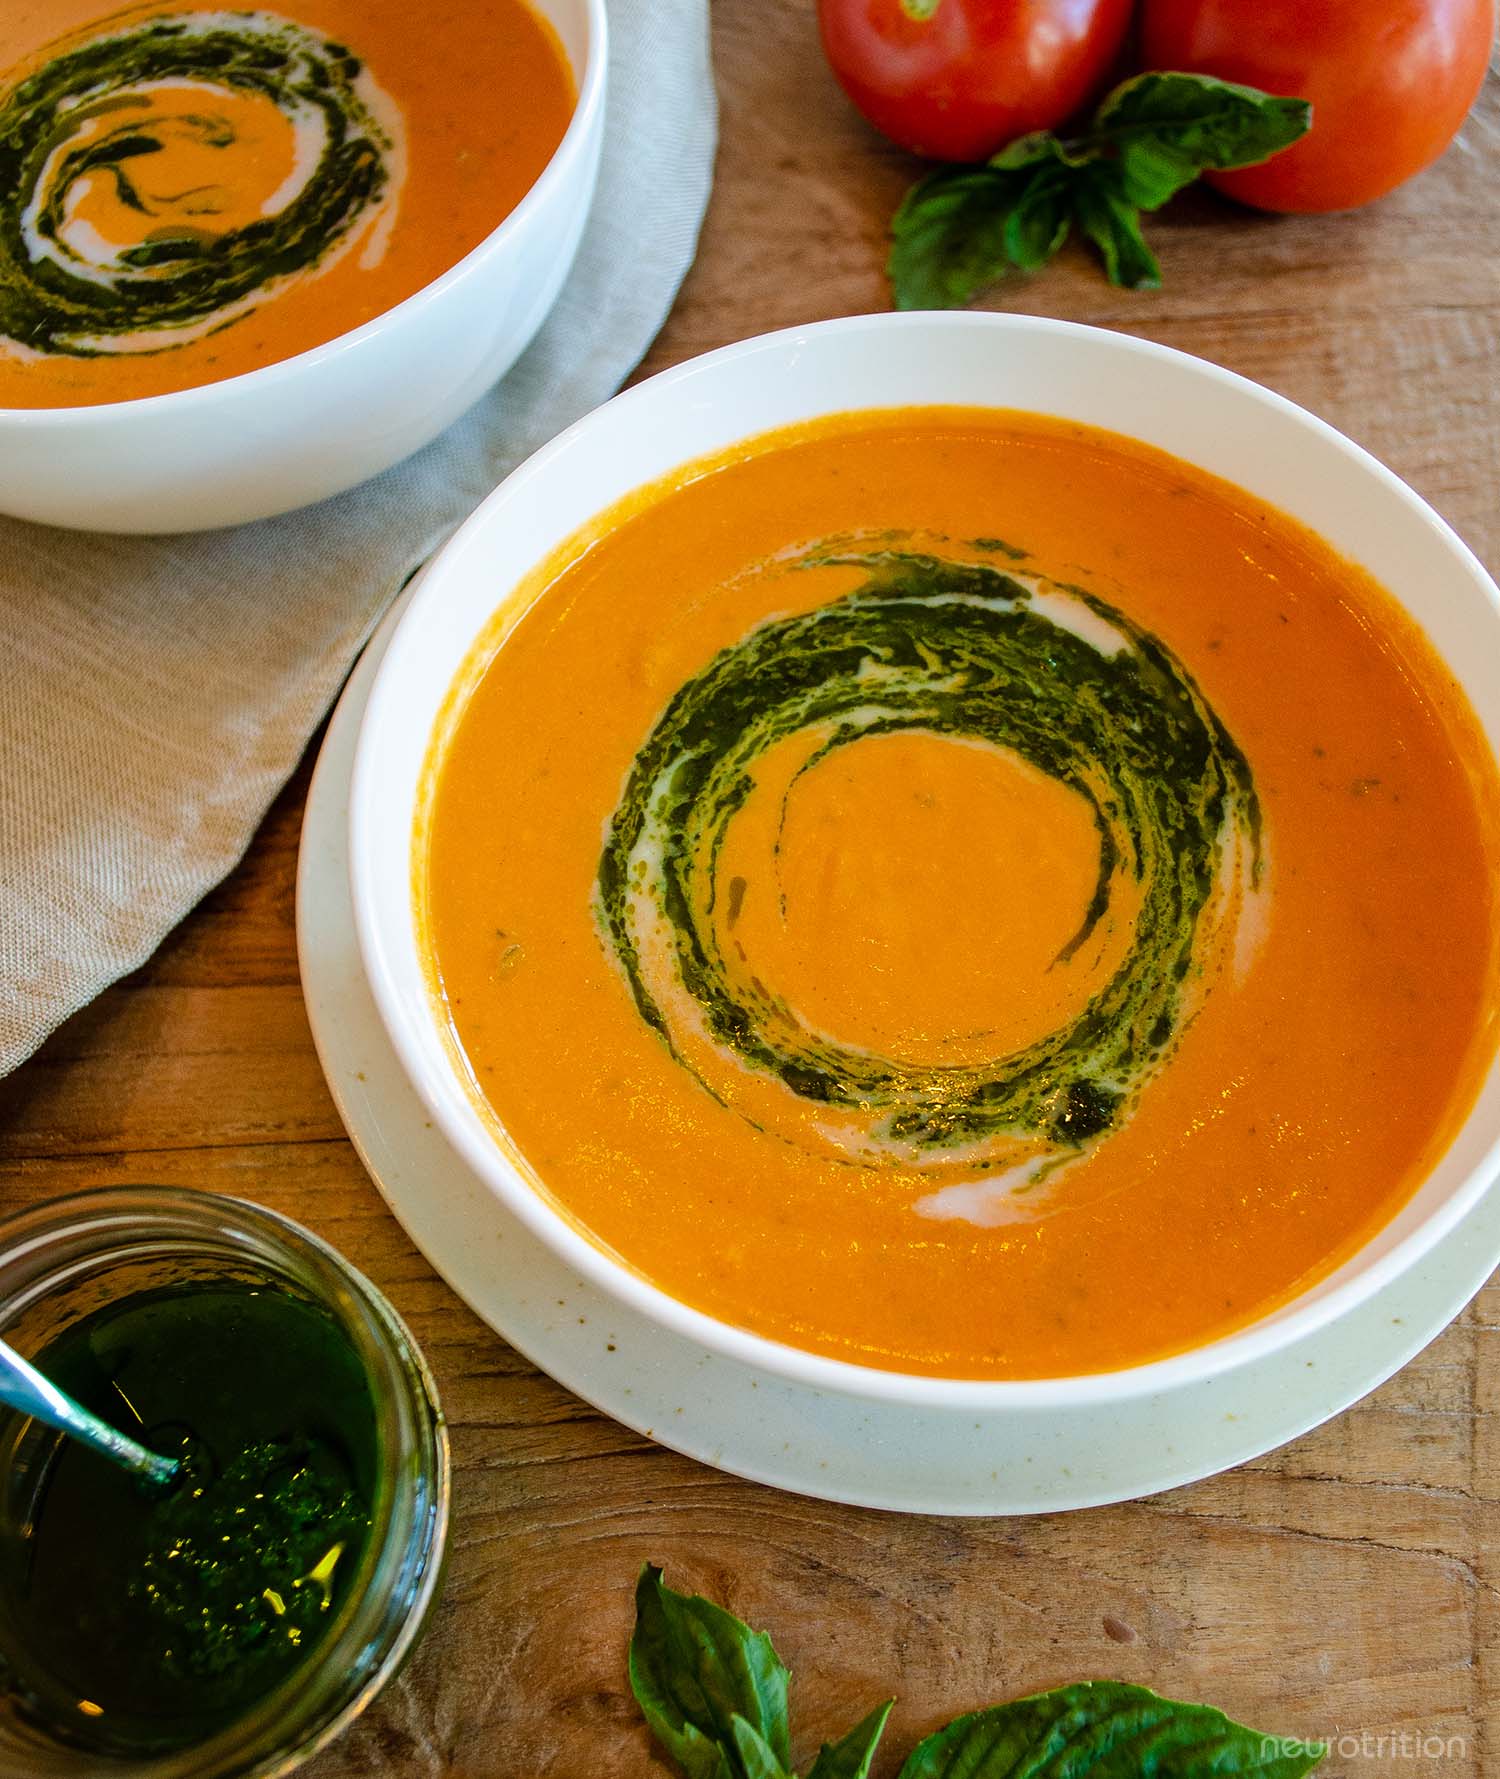 Two white bowls of roasted tomato soup sit on a wooden top table, with fresh whole tomatoes and a jar of pesto beside.